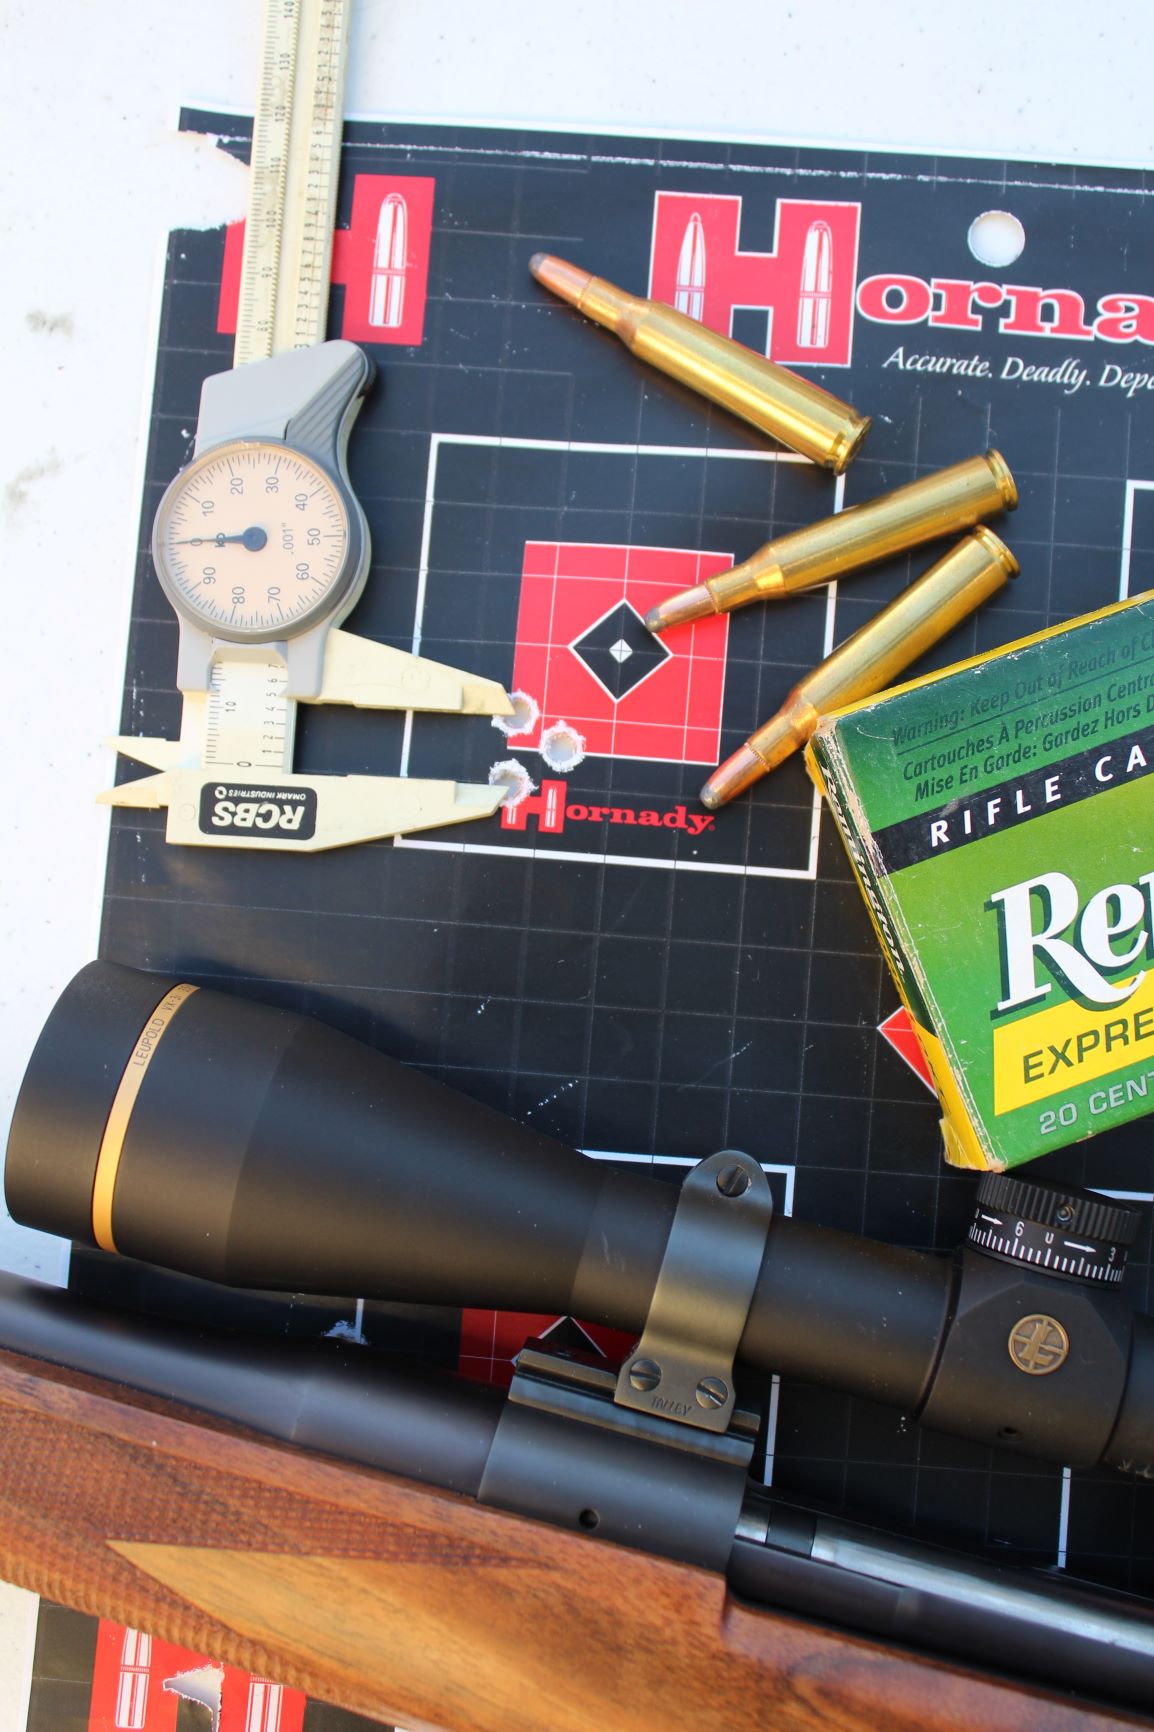 257 Roberts group: There’s no telling exactly what load a given rifle will shoot best…and it may not be the load you prefer to use. So far, Boddington’s Dakota .257 Roberts produces its best groups with Remington 100-grain round-nose Core-Lokt, not the most ideal hunting load for a flat-shooting cartridge. This rifle needs handloading and will get it!